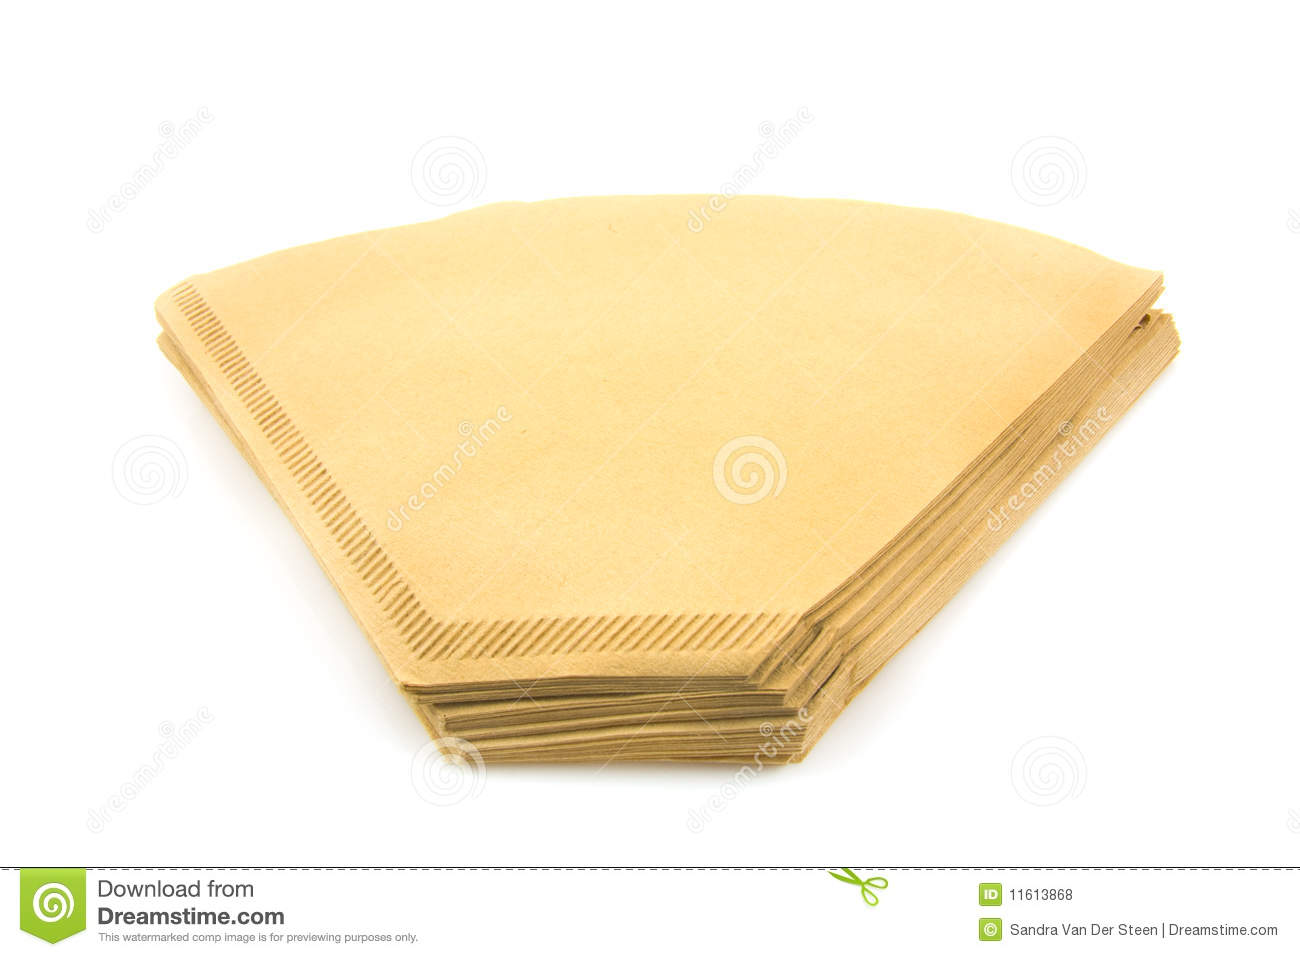 Recycle Coffee Filters Royalty Free Stock Photos   Image  11613868